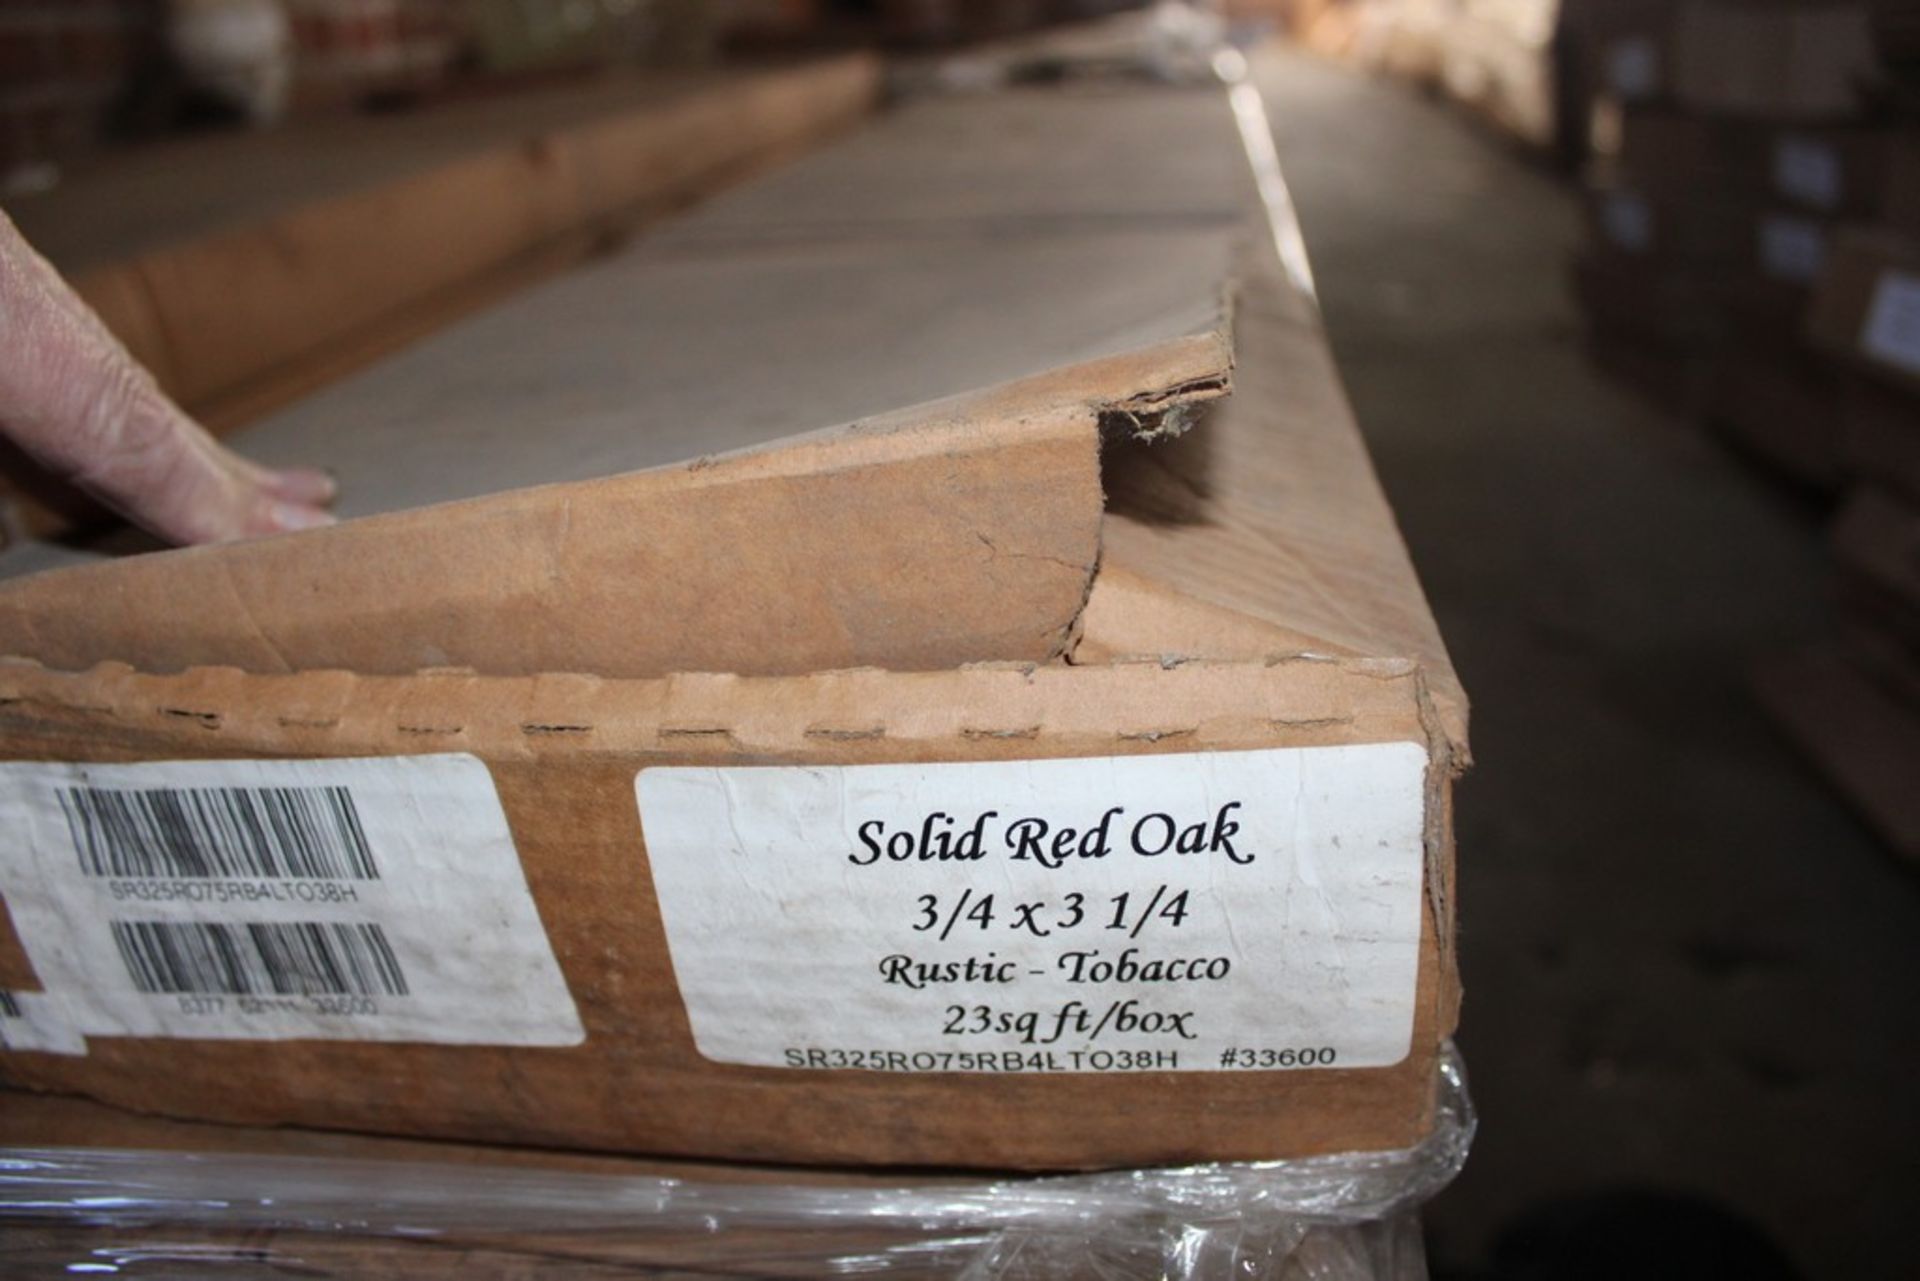 (22) BOXES OF 3-1/4" SOLID RED OAK FLOORING, RUSTIC TOBACCO, 23 SQ. FT. PER BOX - Image 2 of 2